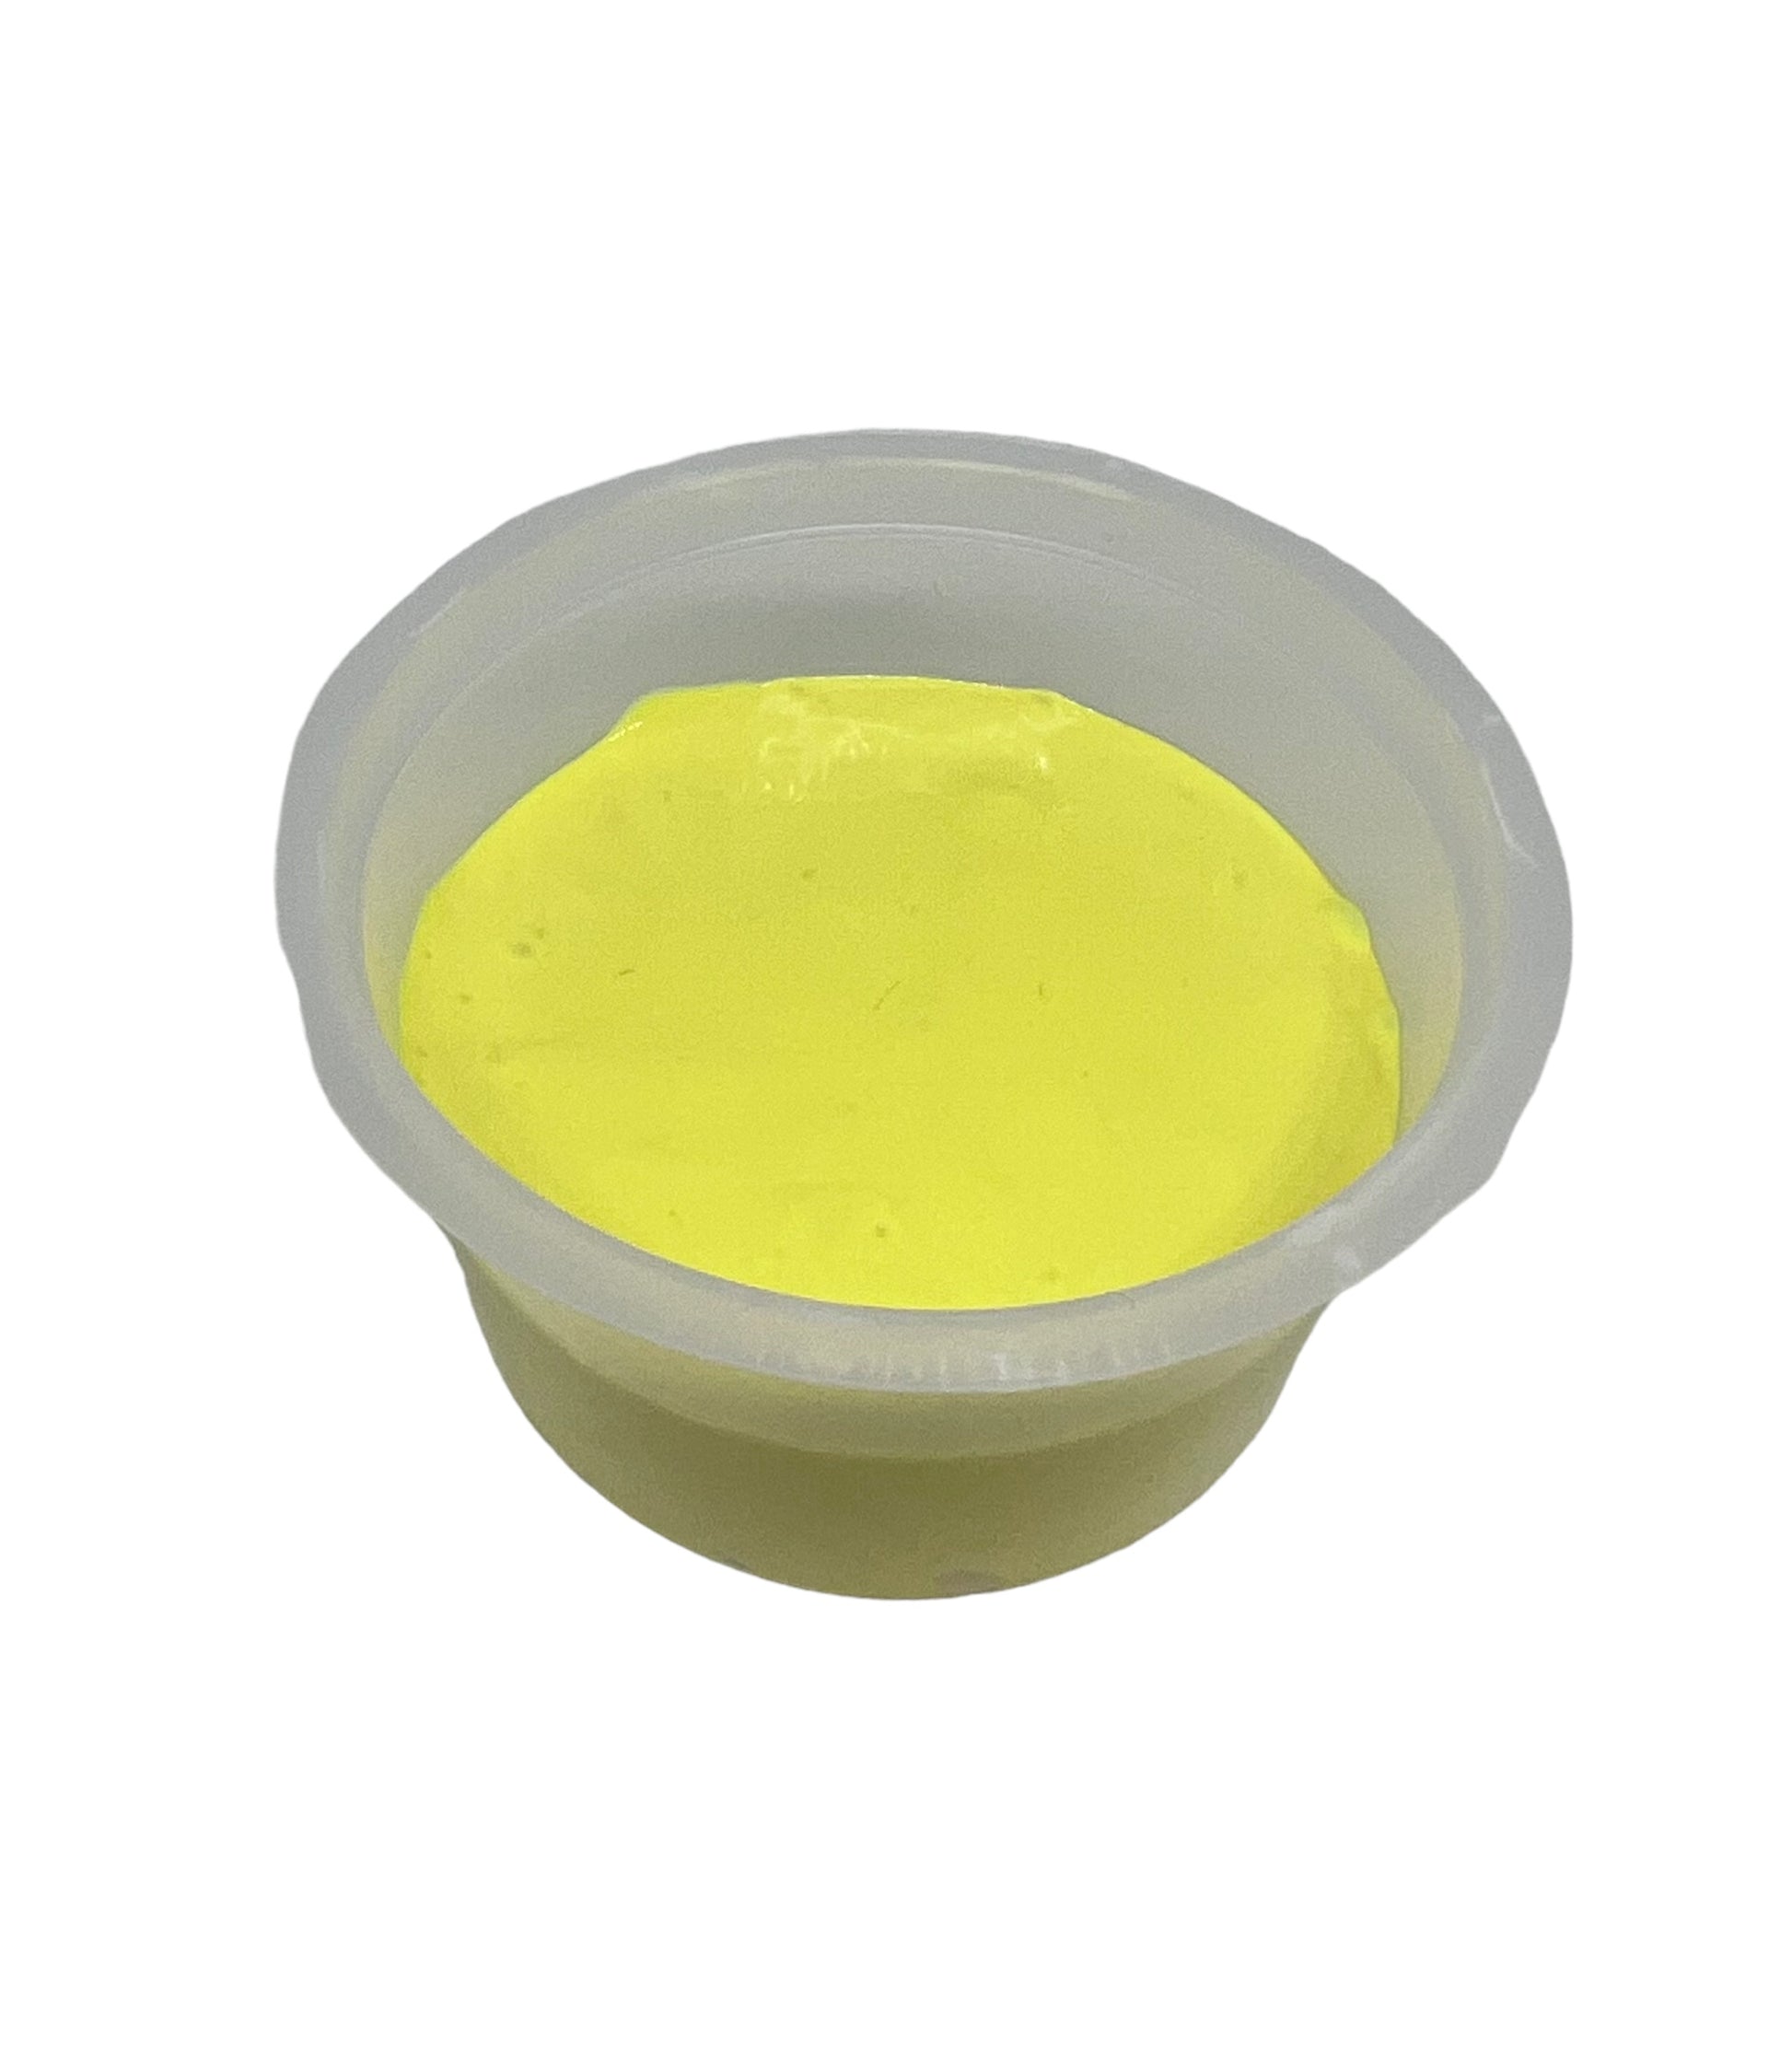 Yellow exercise putty